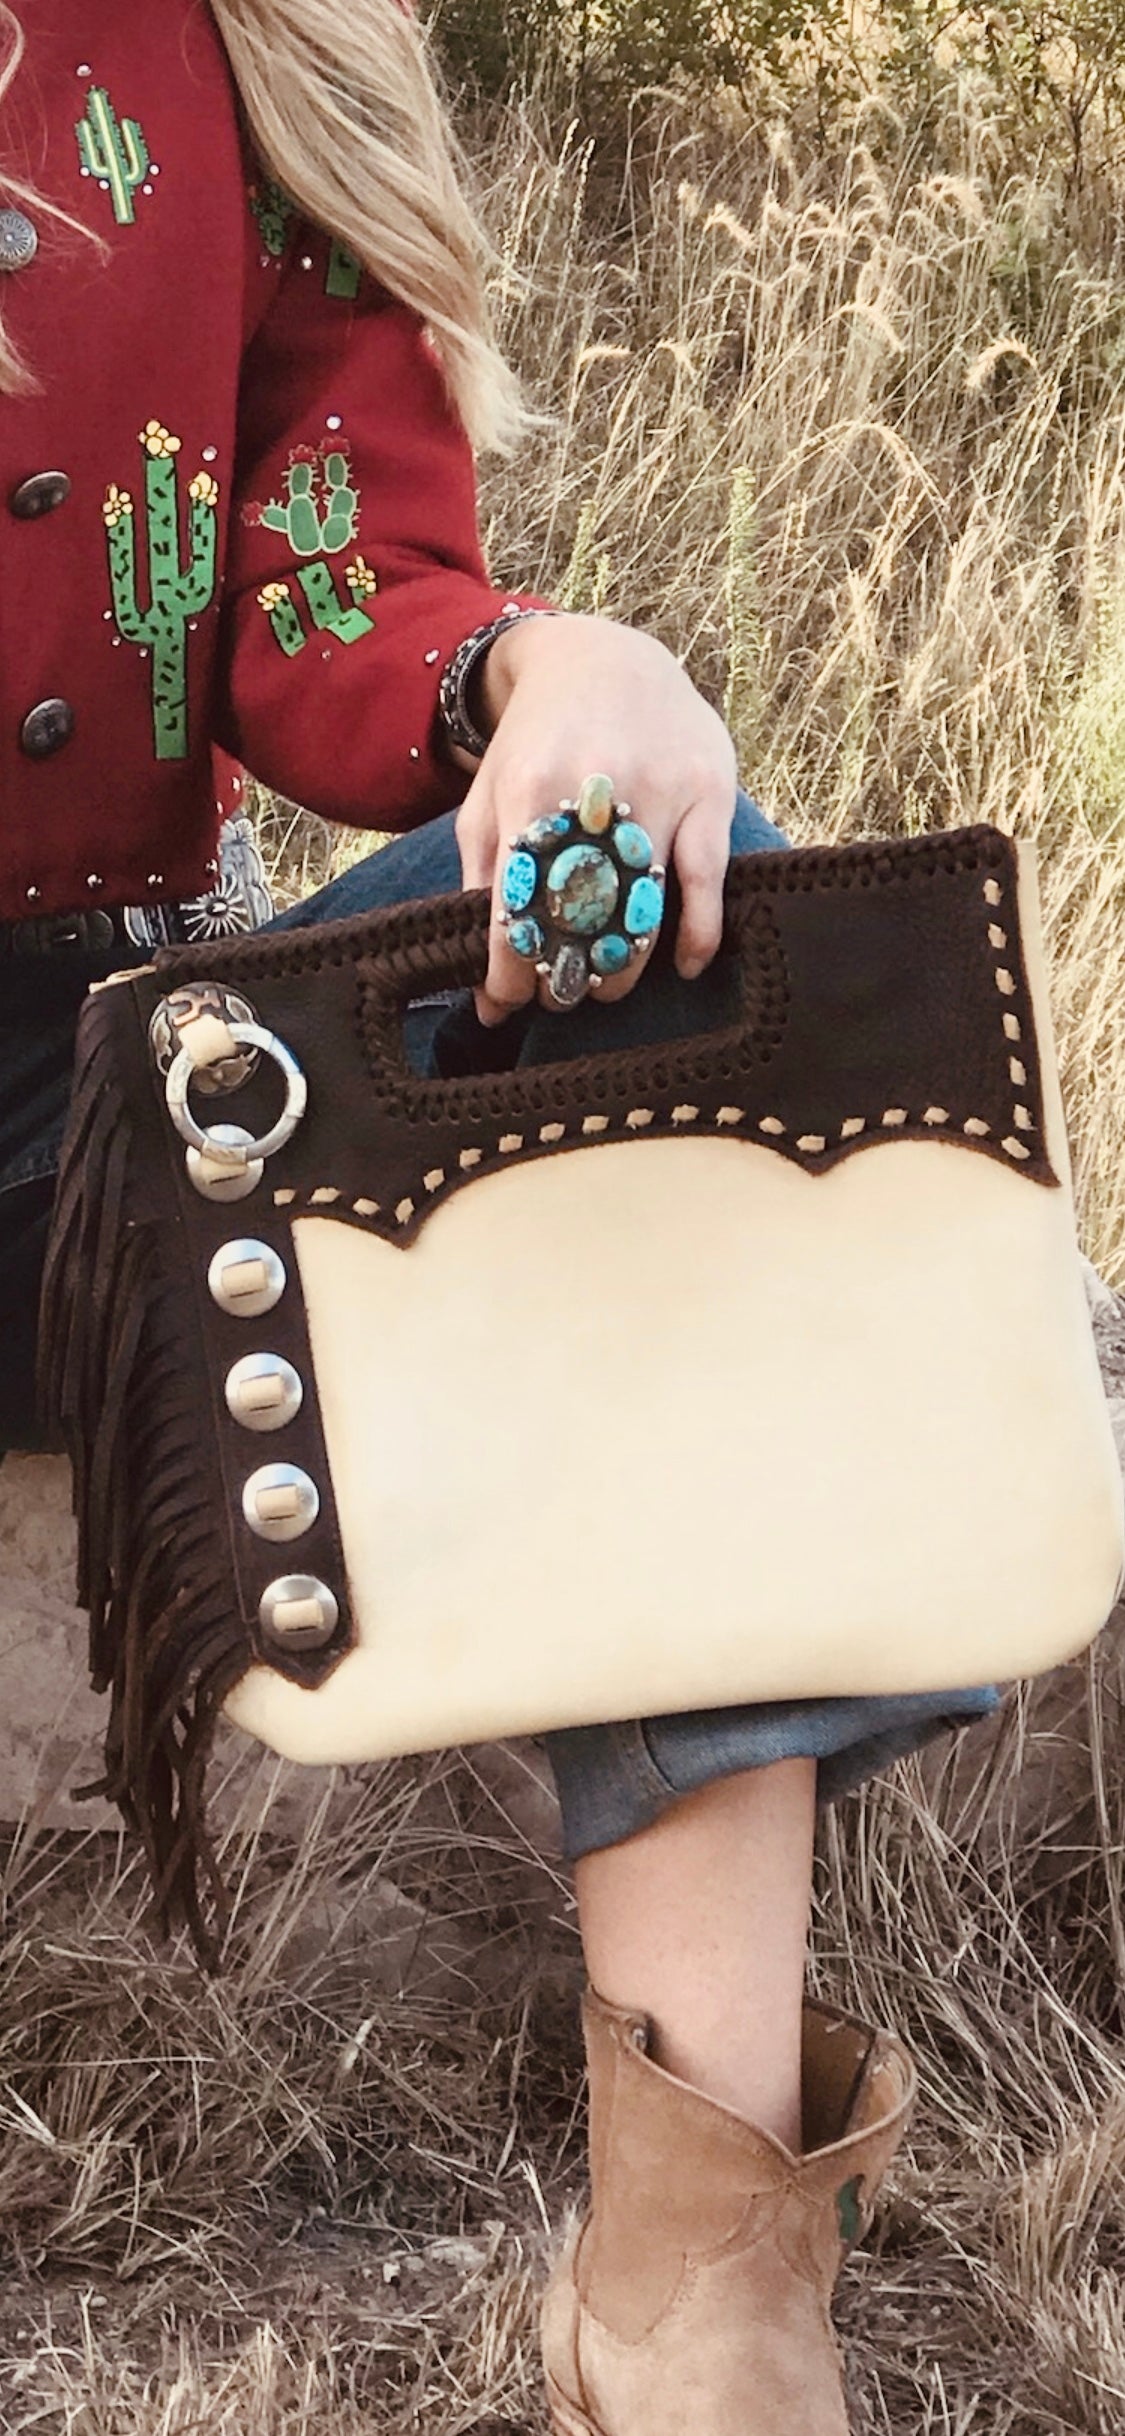 Designer Custom Leather - This Sunday's Sale is sure to be FABULOUS! 💃🏼  Join us Sunday at 7 pm cst for a great selection of bags and accessories!  To be entered in